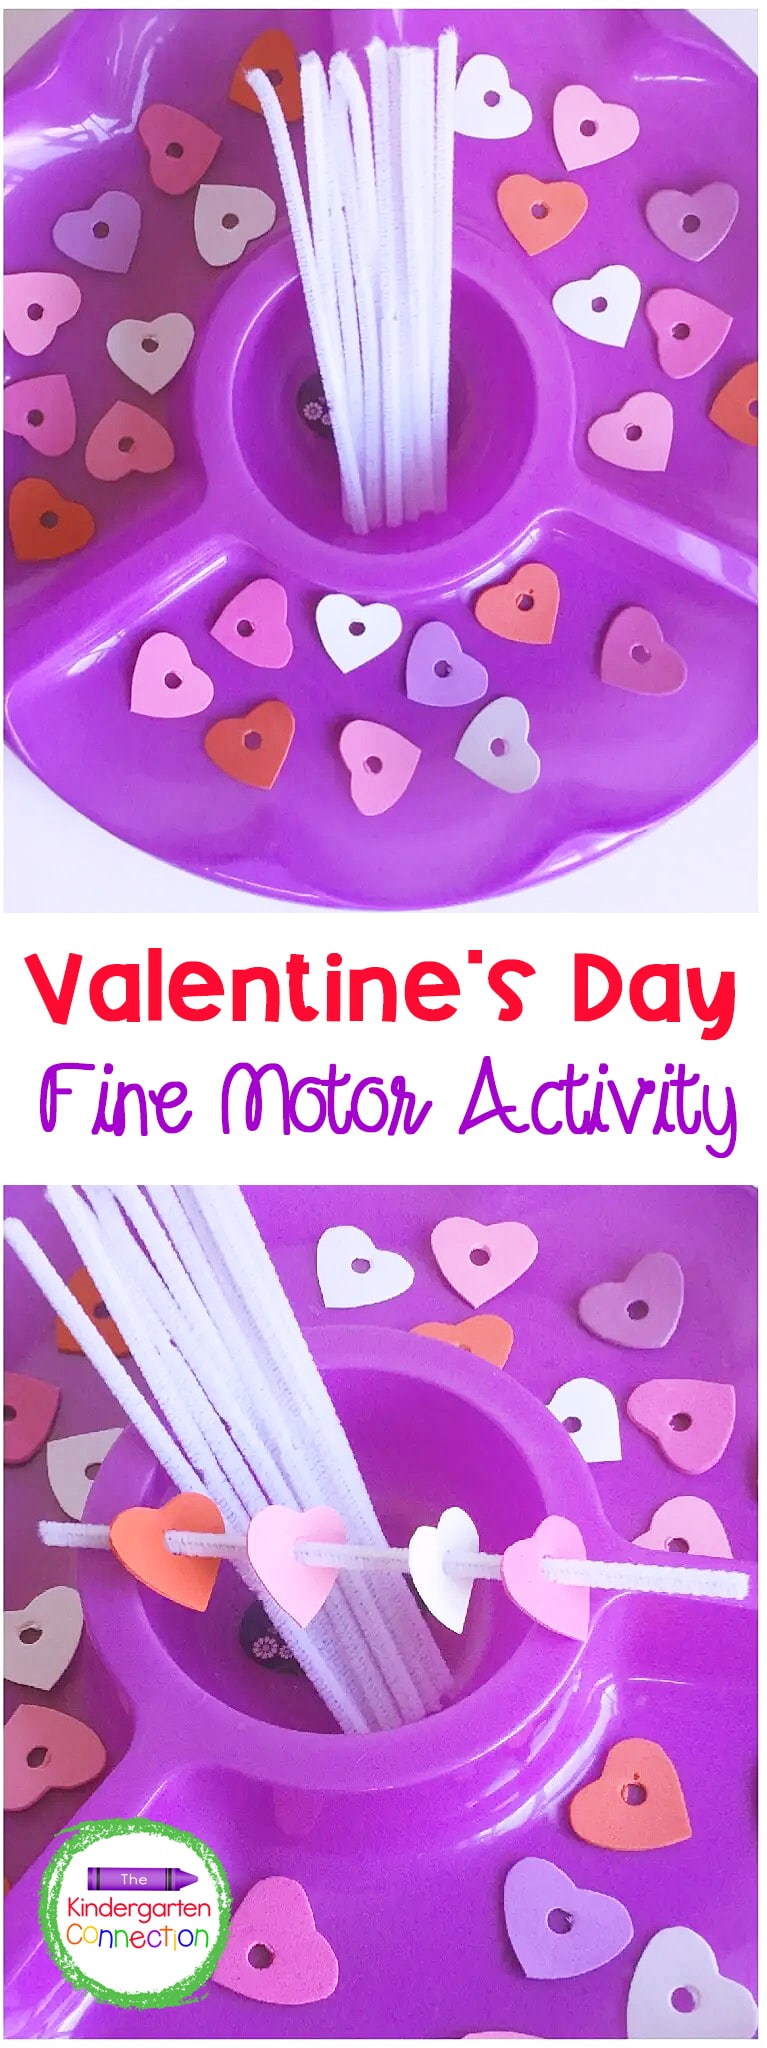 Have a blast working on fine motor skills, patterns, and color sorting with this fun Heart Threading Fine Motor and Patterning Activity!